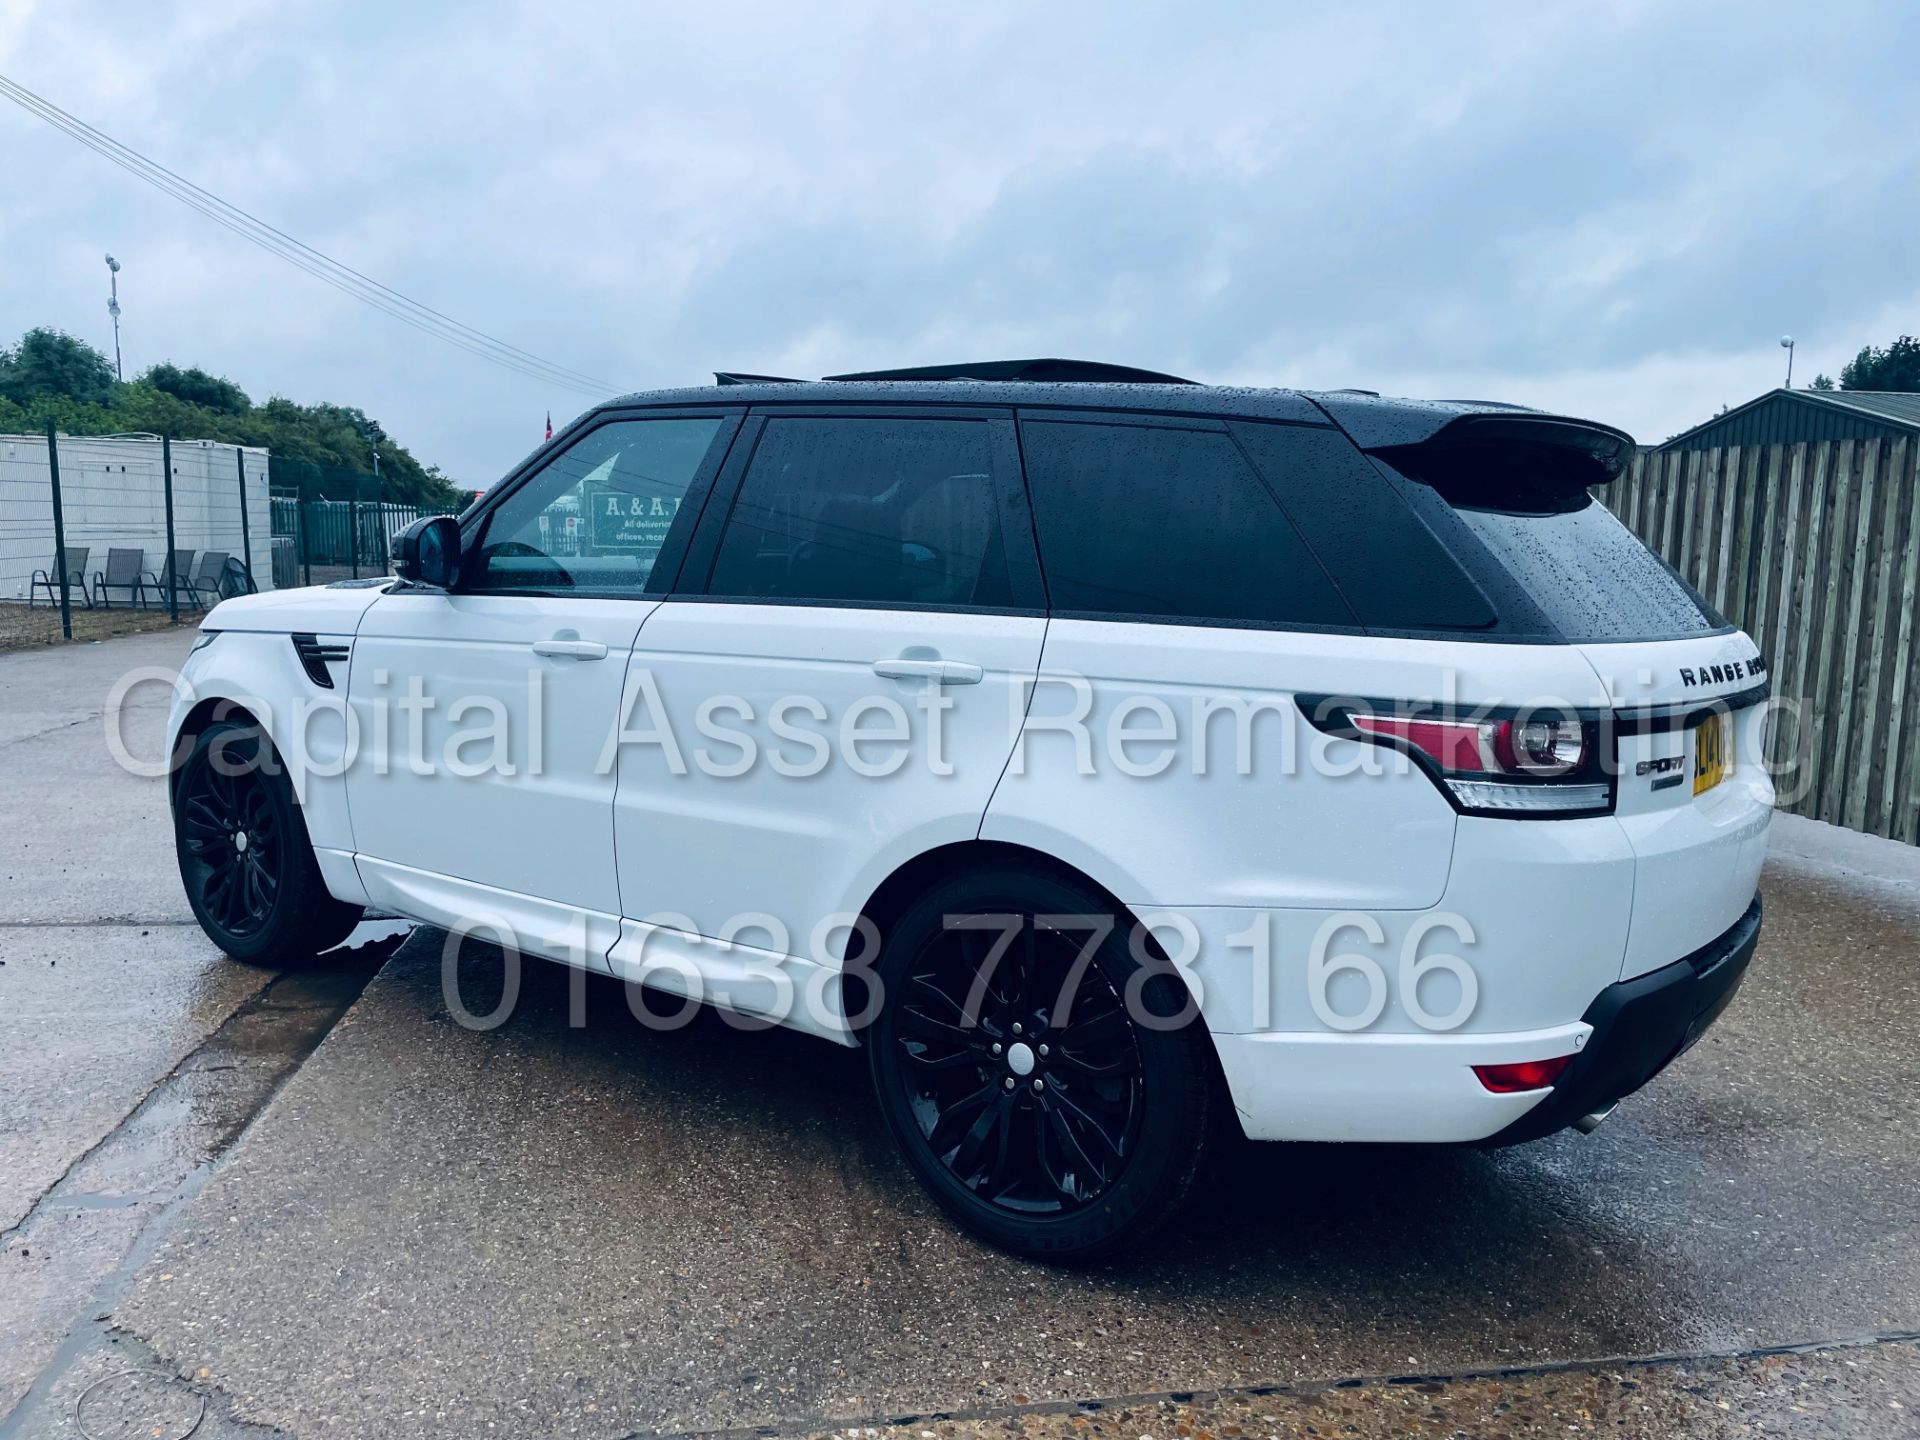 On Sale RANGE ROVER SPORT *SPECIAL EDITION* (2014) '3.0 TDV6 - AUTO' *SAT NAV & PAN ROOF* (TOP SPEC) - Image 5 of 54